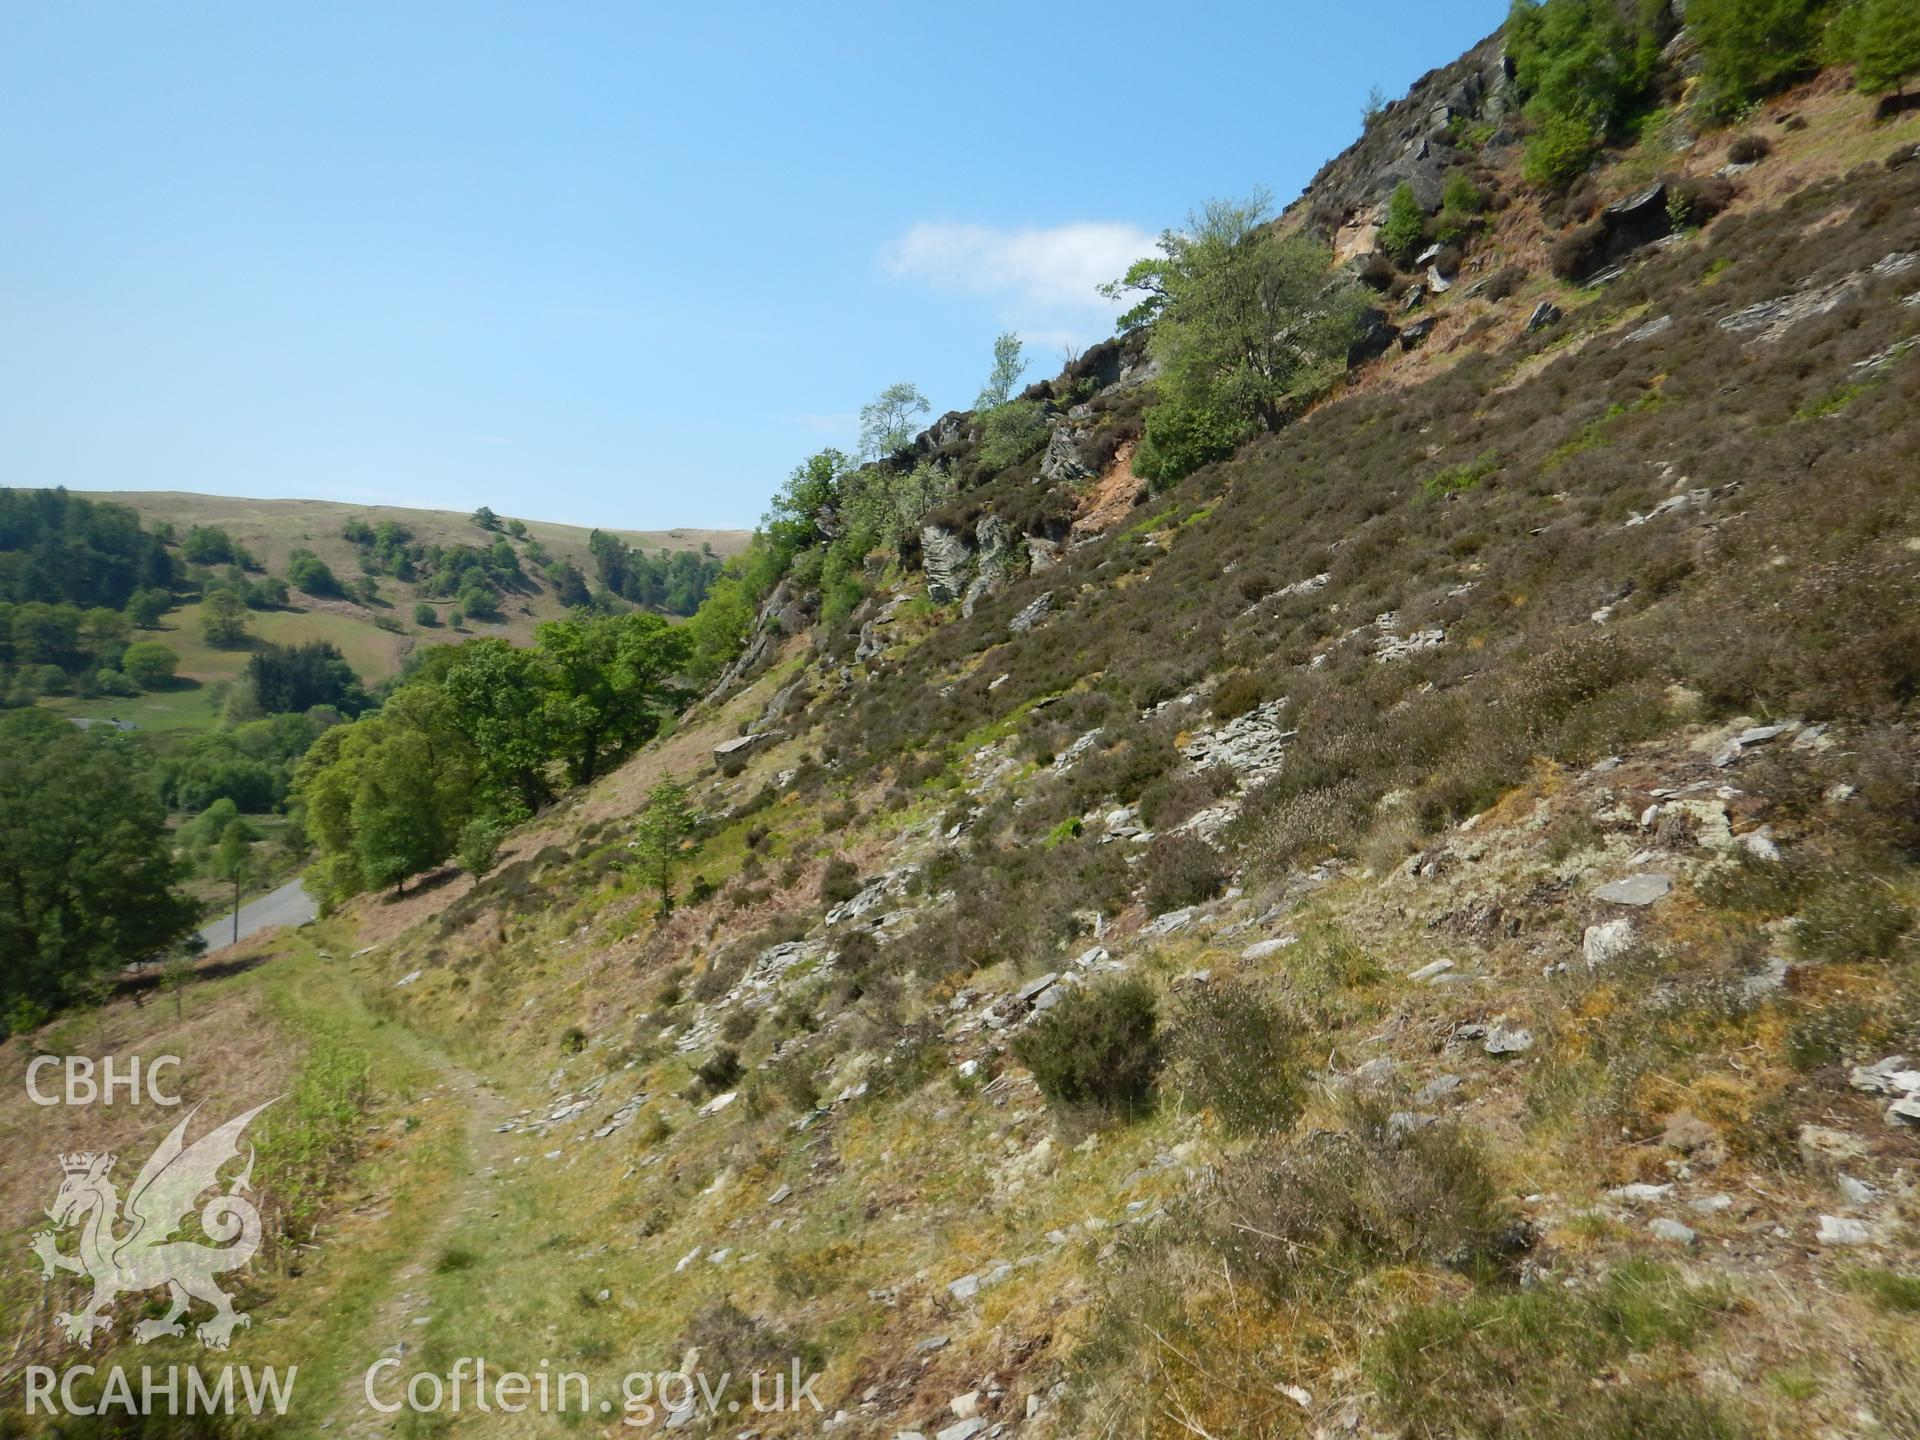 View south-west along proposed cable route up the side of Gurnos Hill. Photographed for Archaeological Desk Based Assessment of Afon Claerwen, Elan Valley, Rhayader. Assessment conducted by Archaeology Wales in 2018. Report no. 1681. Project no. 2573.